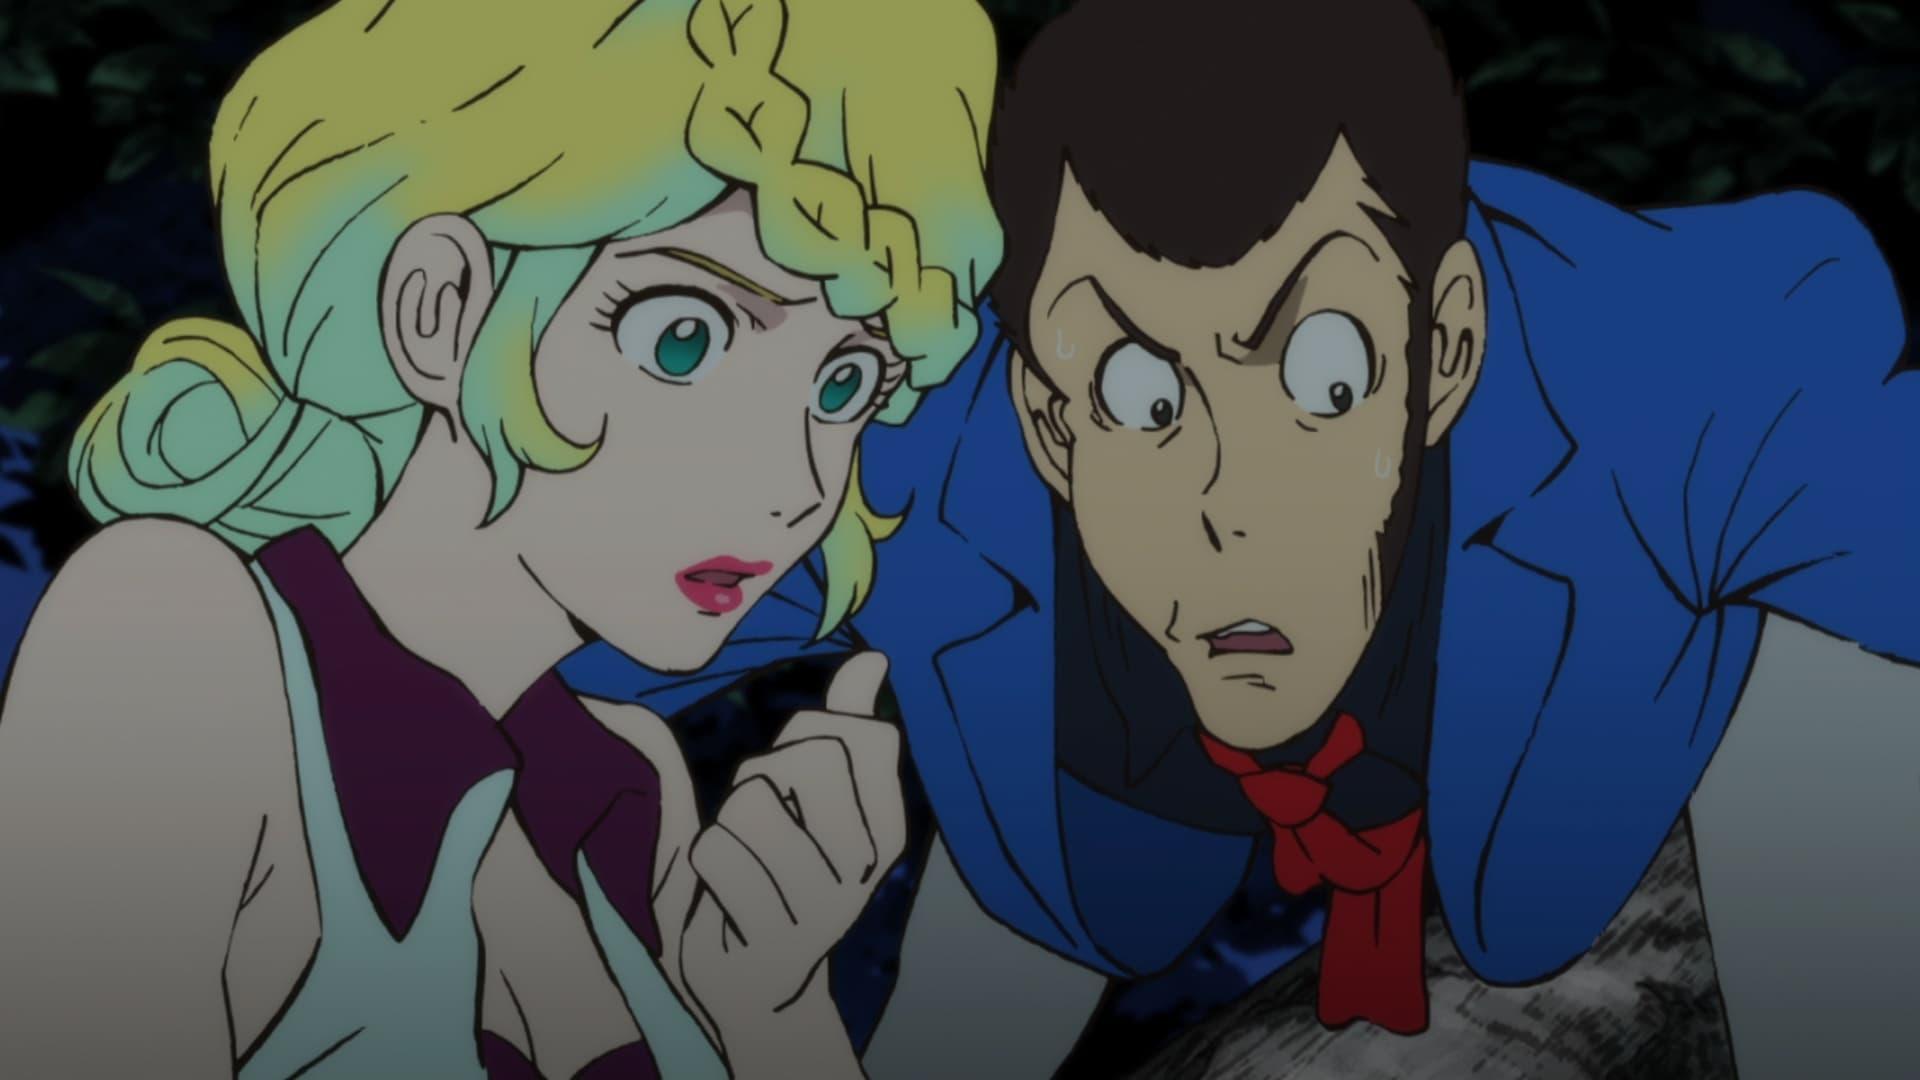 Lupin the Third: Venice of the Dead backdrop